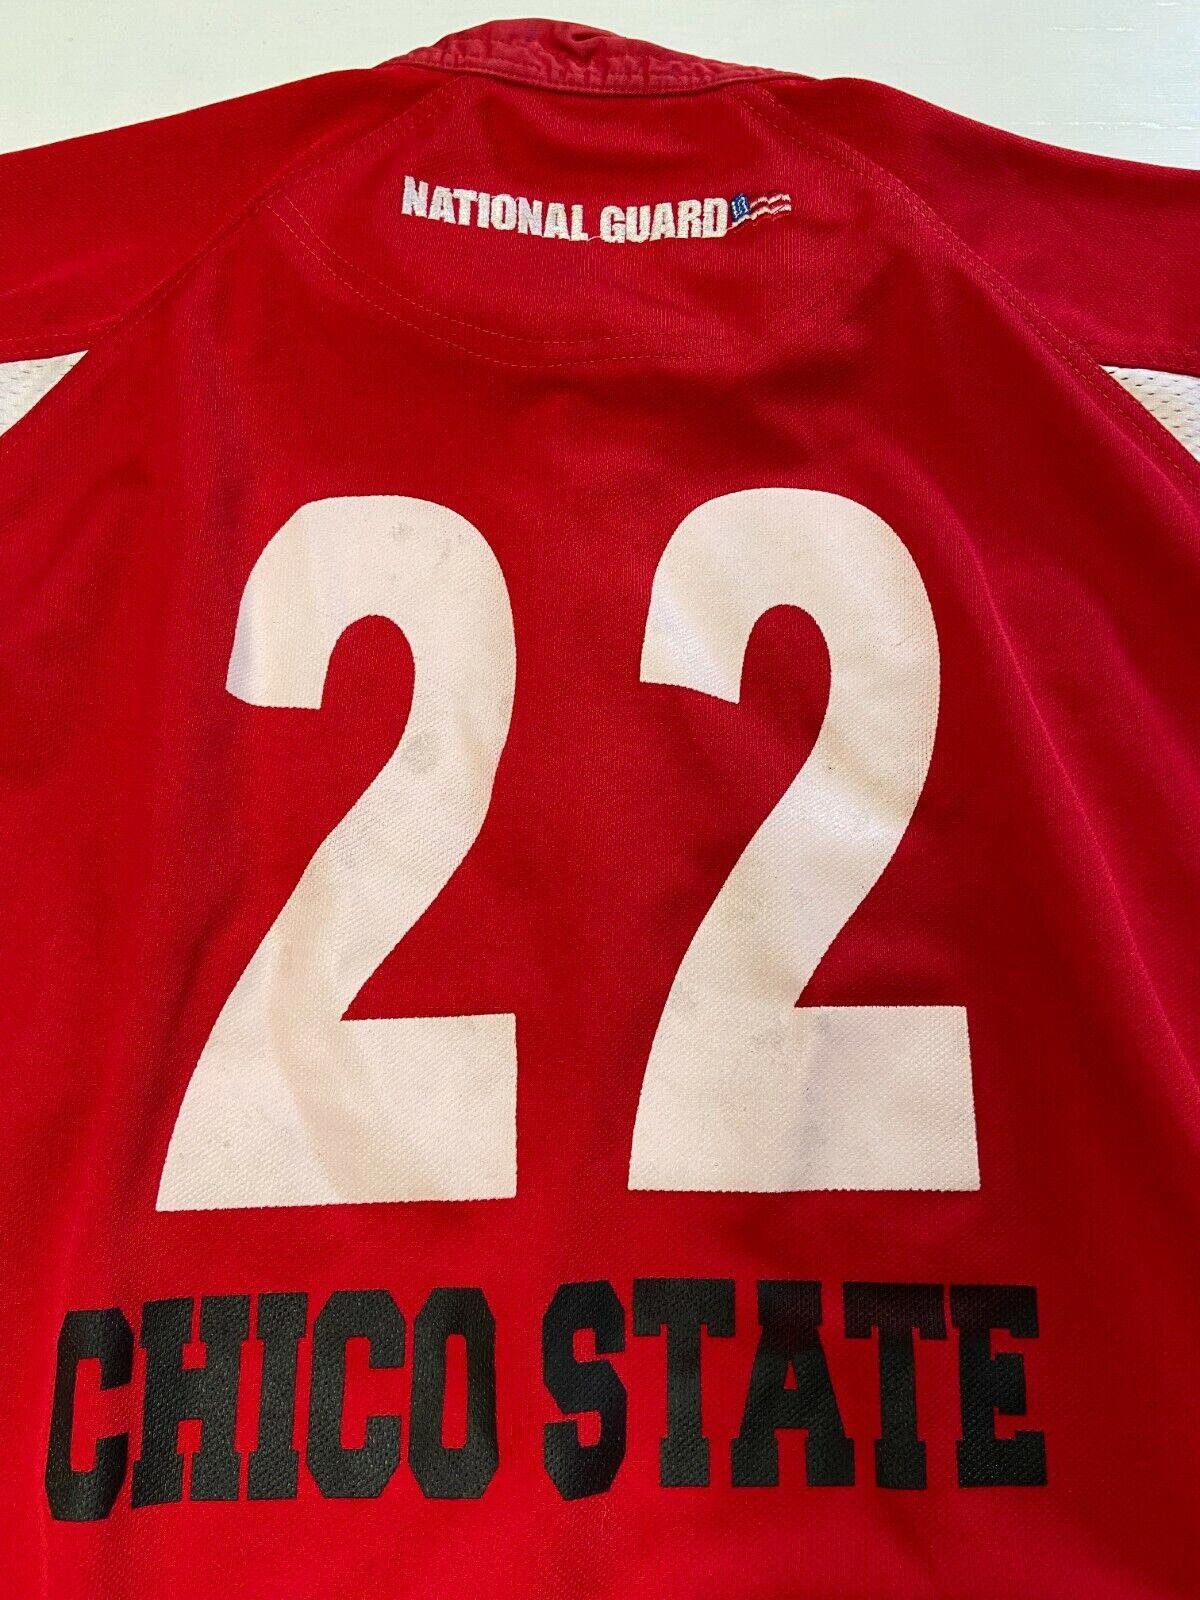 Mens KOOGA Red #22 Chico State Rugby Jersey Sz M DkvVcN3Vd